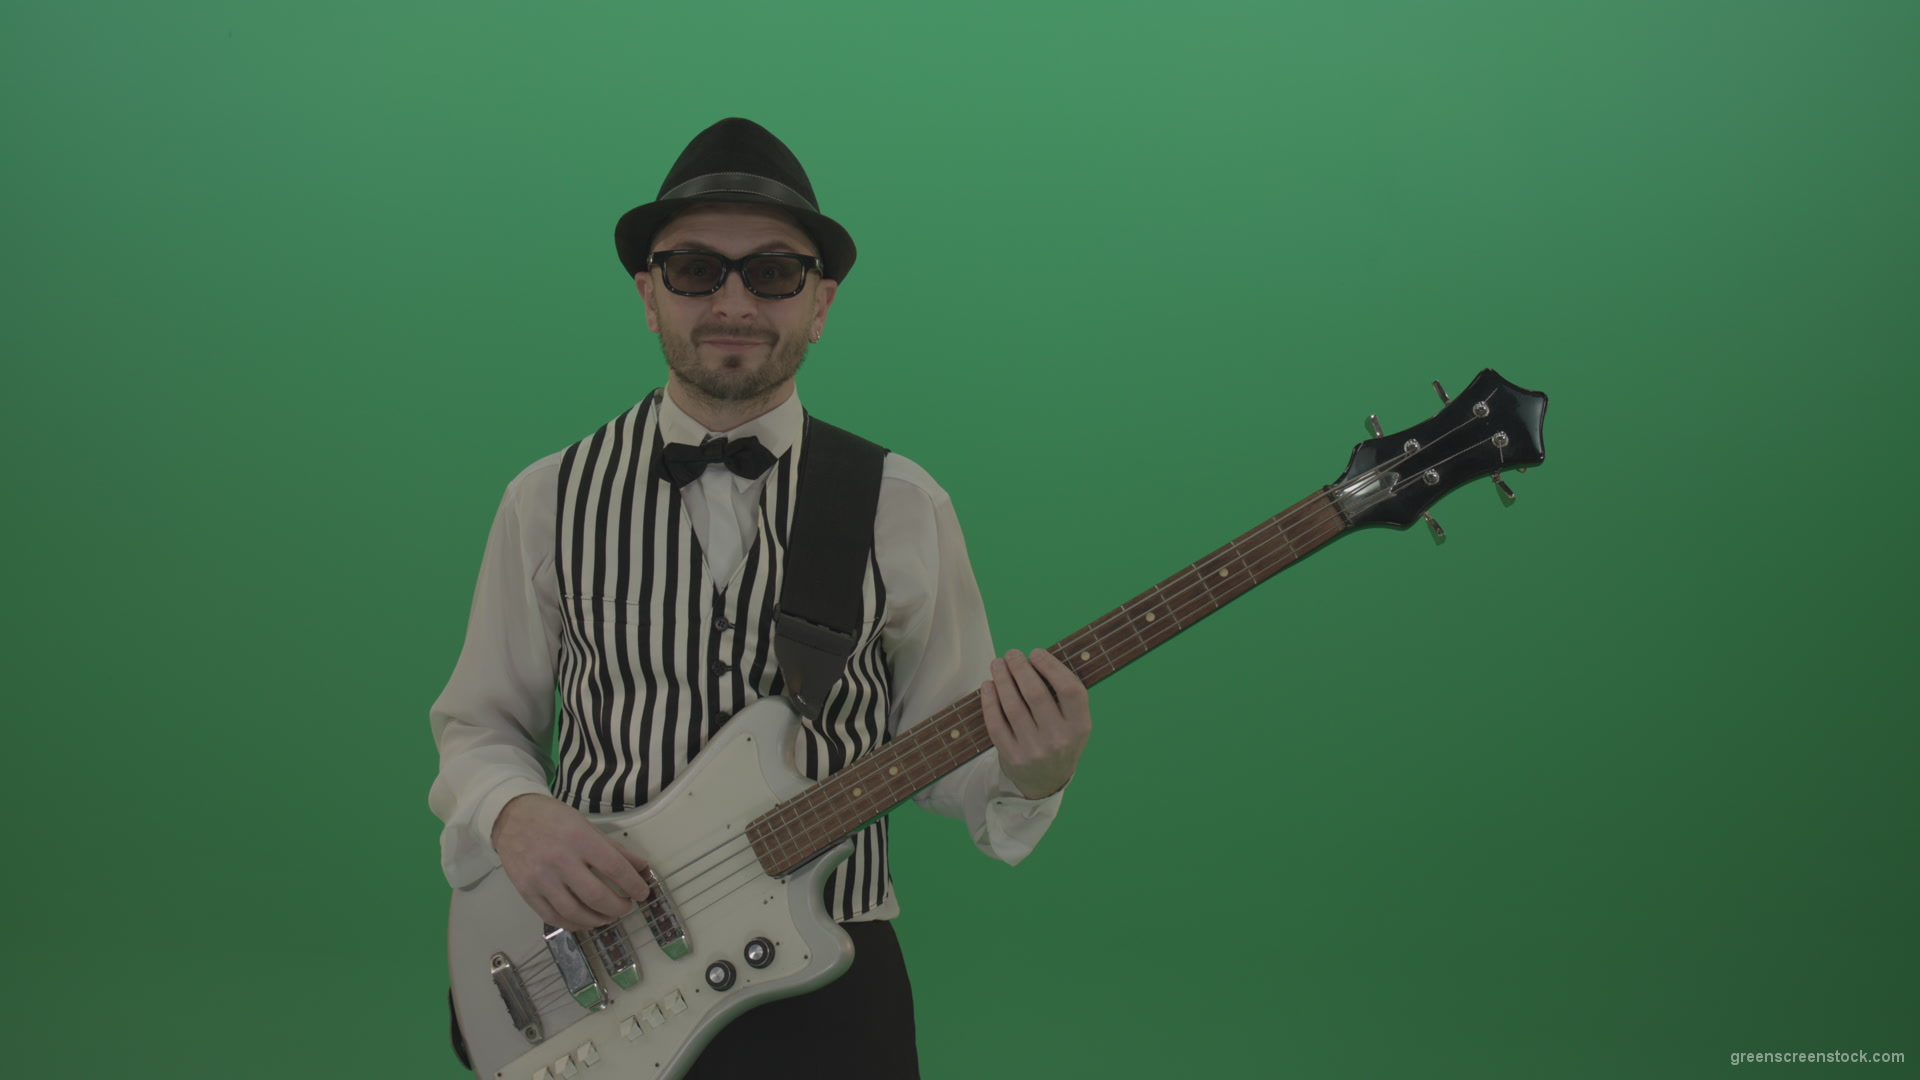 Guitar-player-browses-the-bass-guitar-playing-solo-and-charismatically-shows-facial-expressions_001 Green Screen Stock